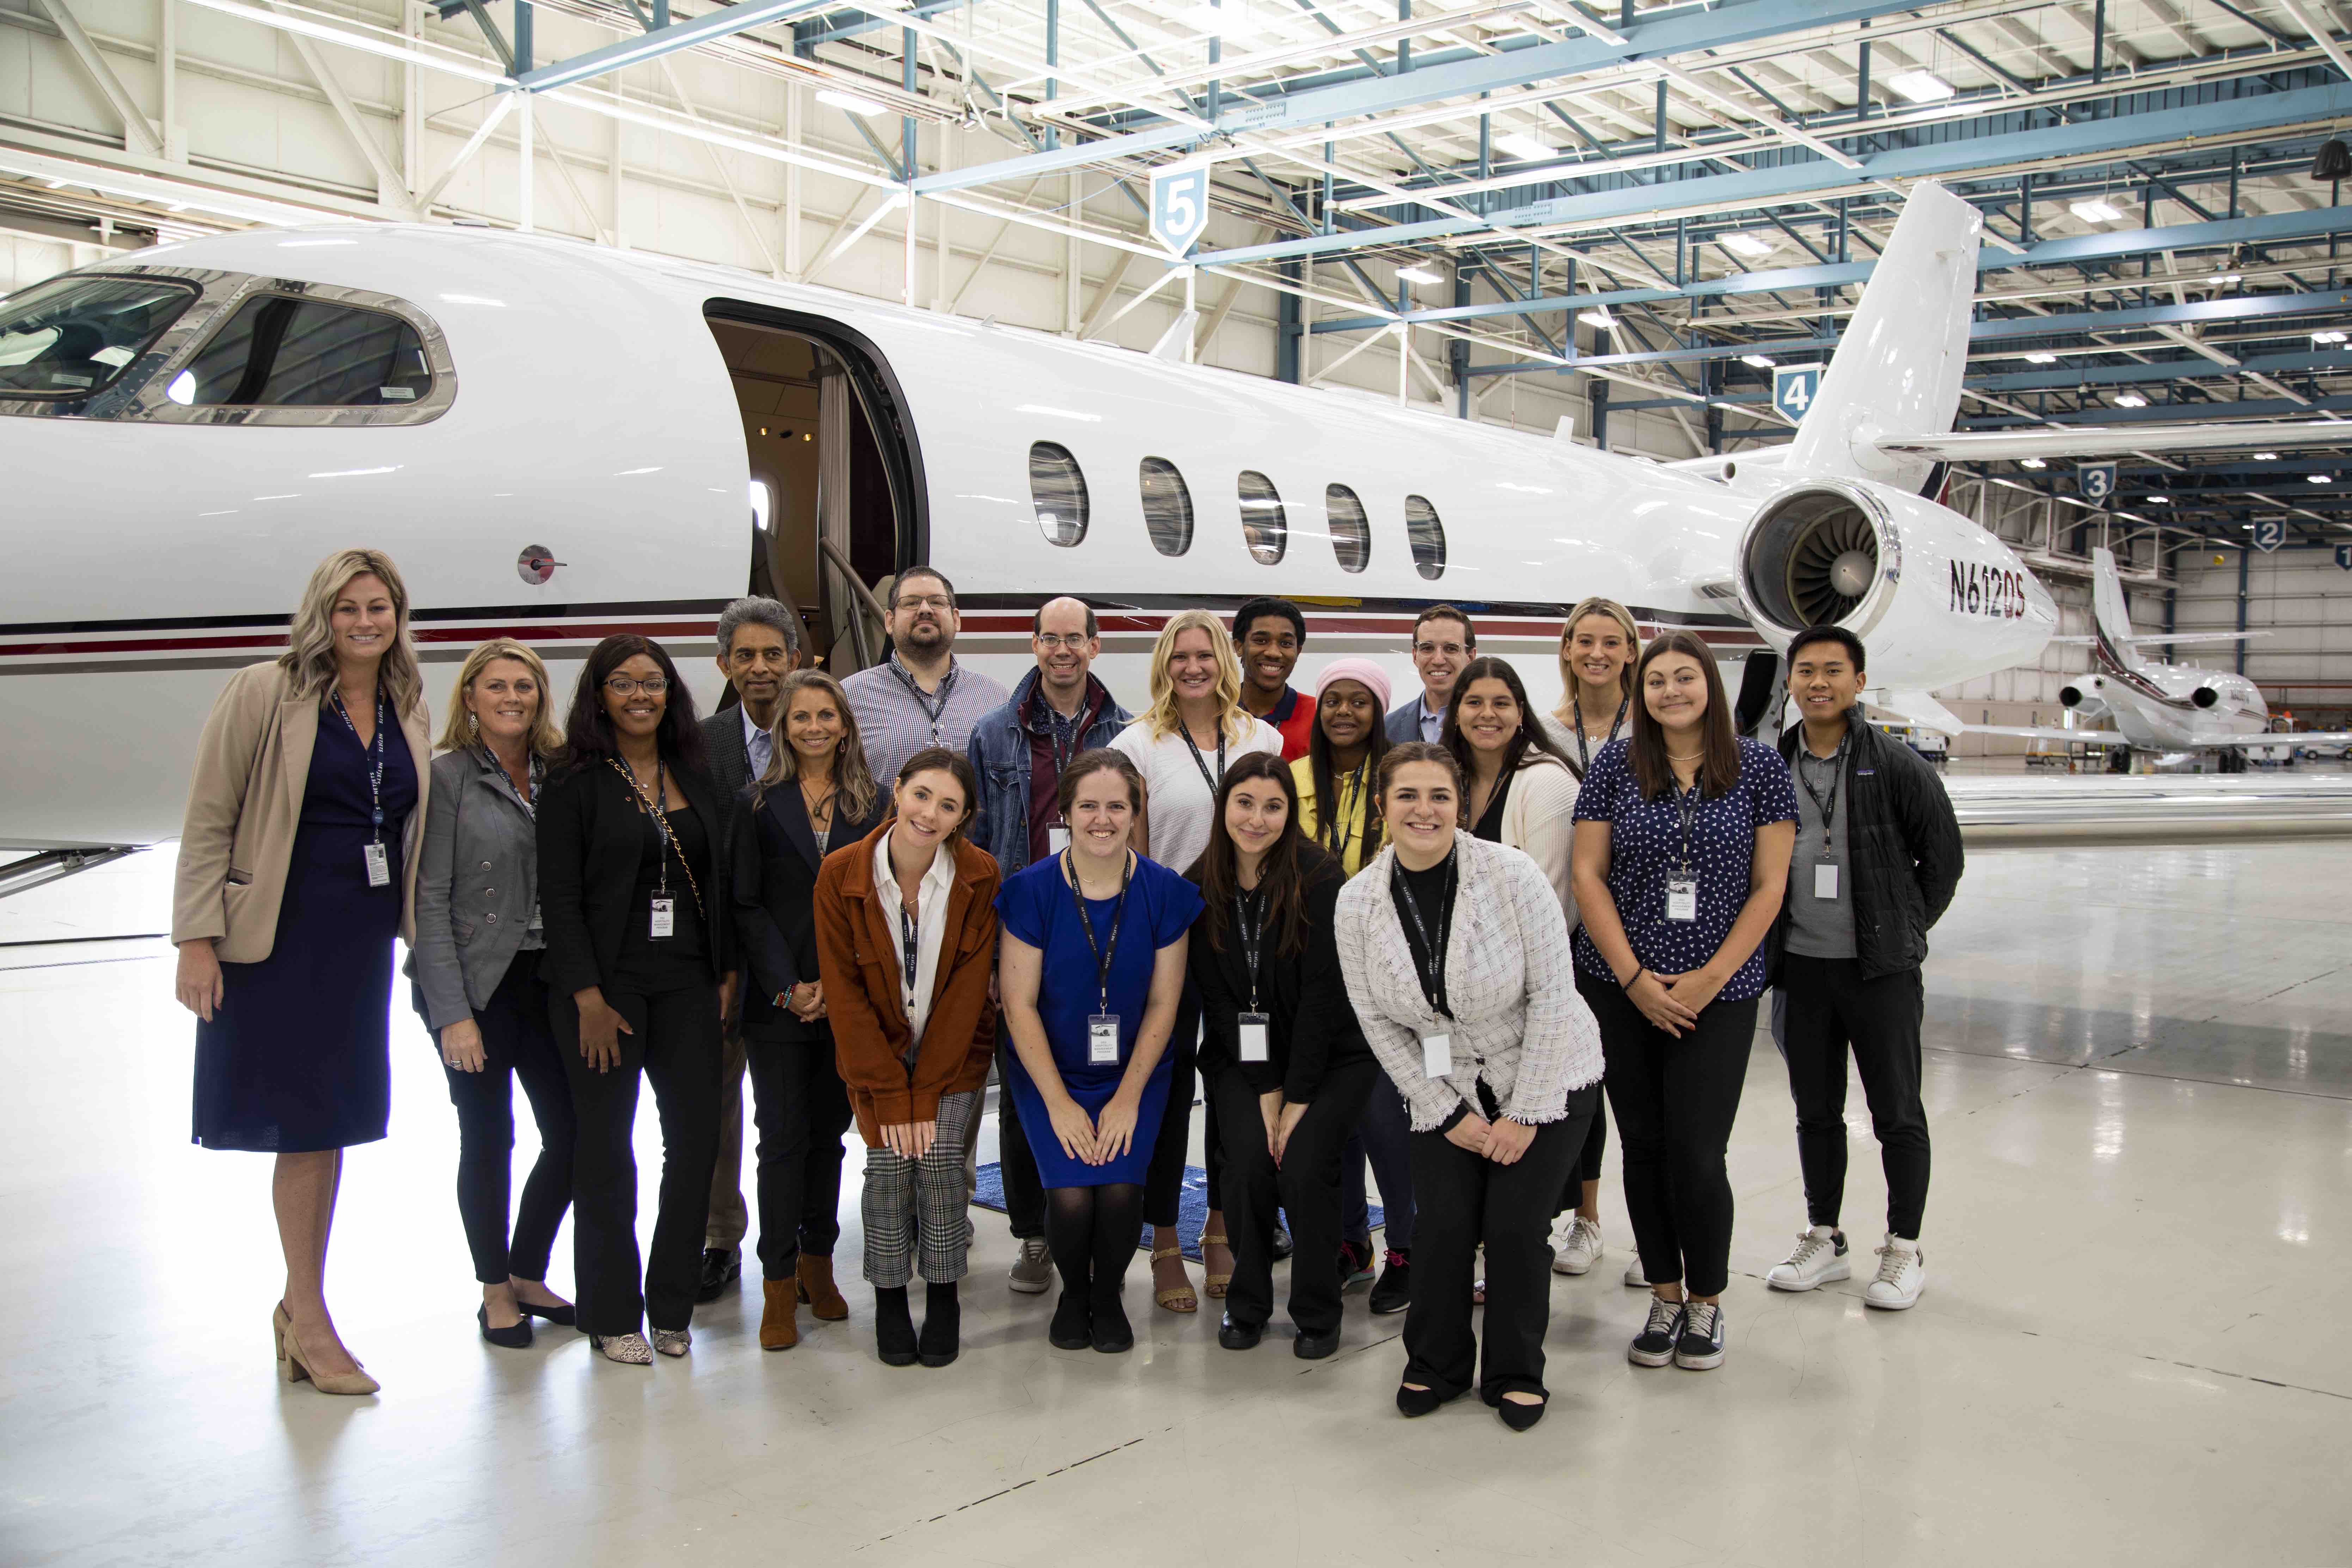 Ohio State students and NetJet employees pose for photo in airplane hanger